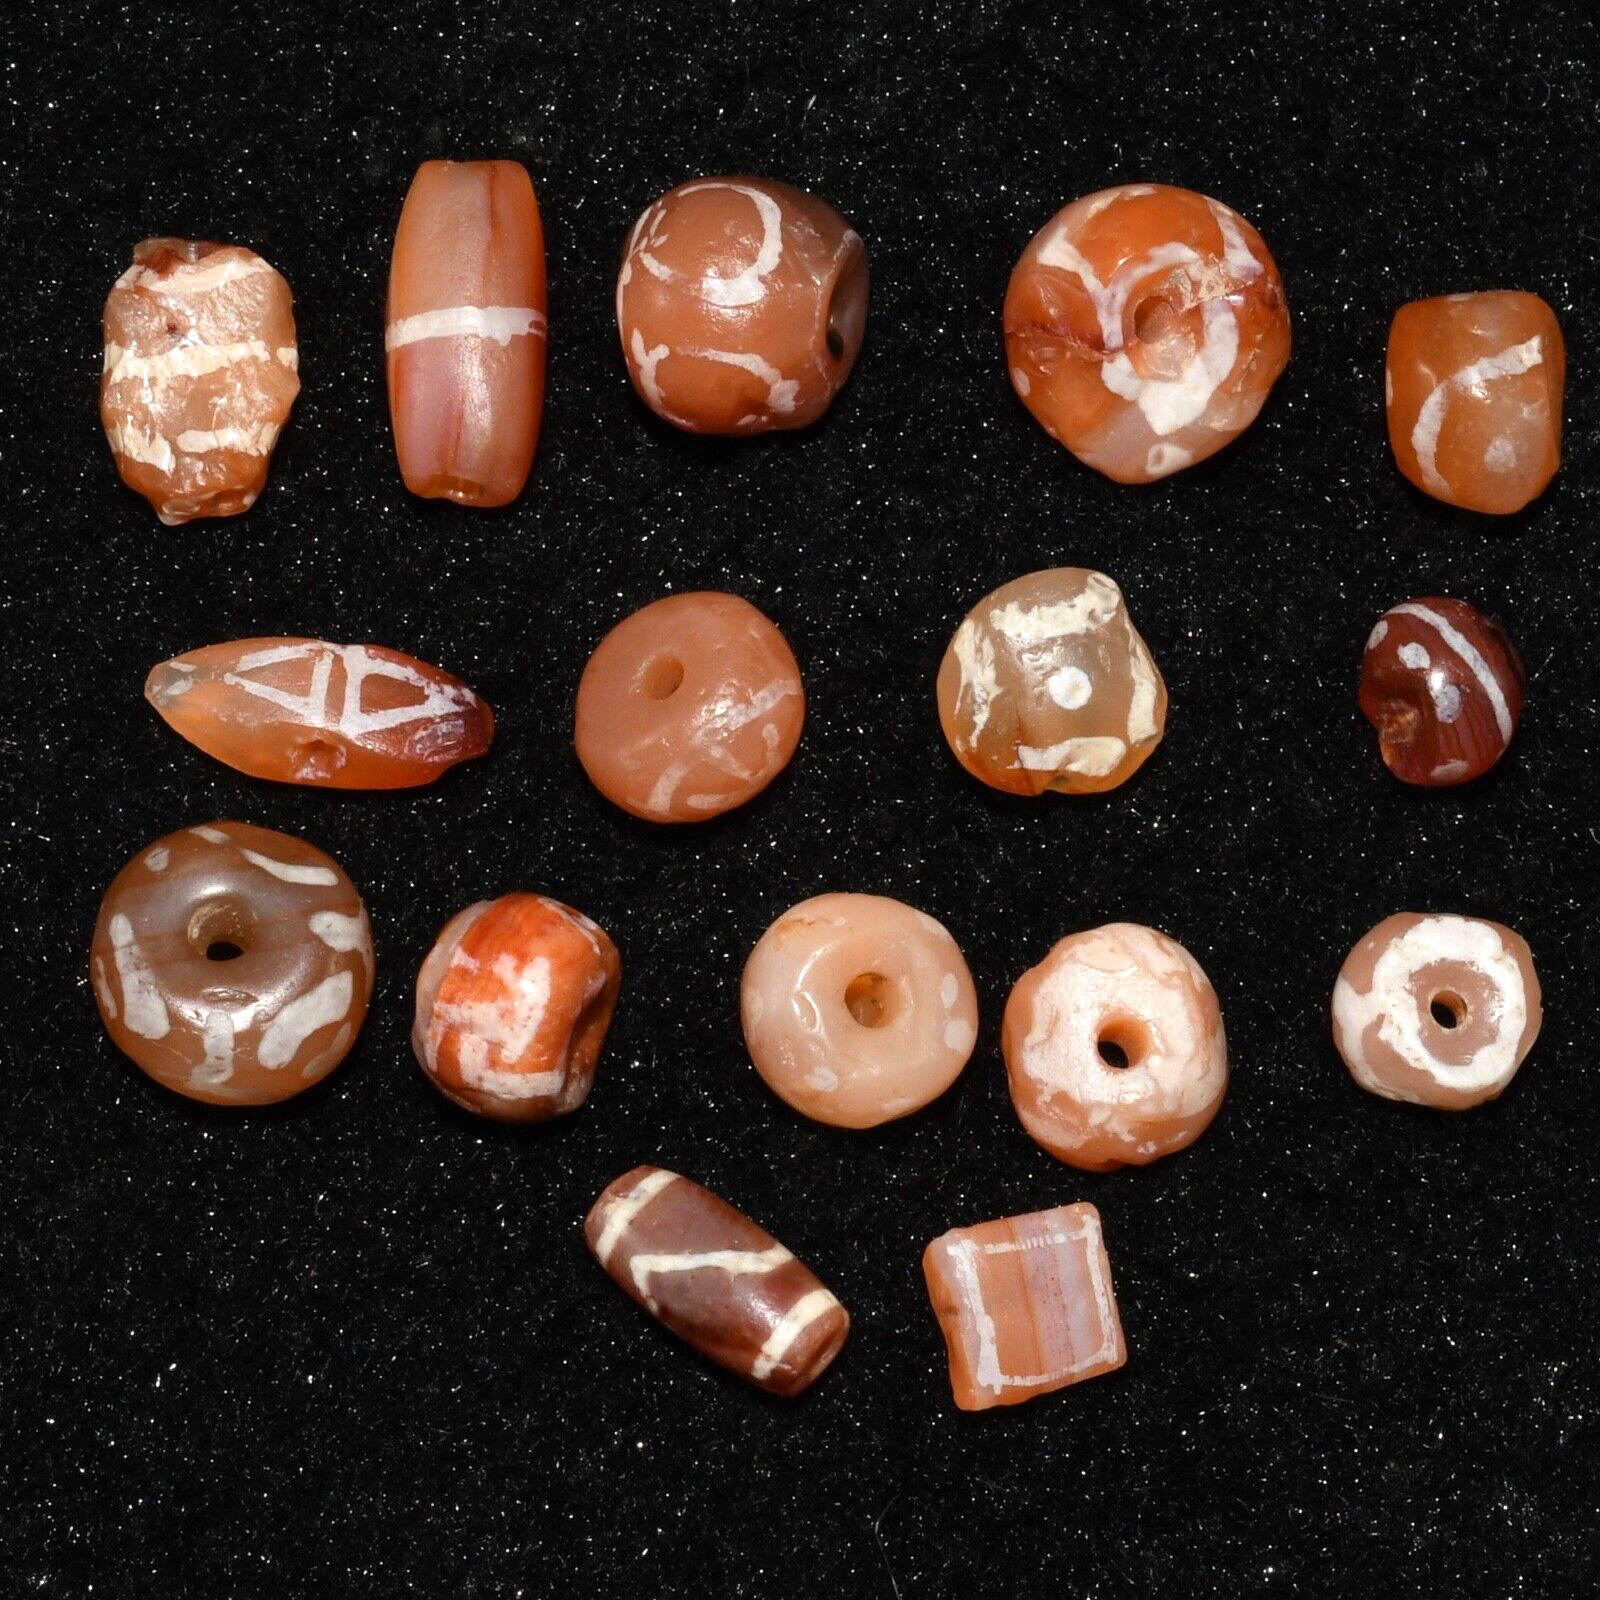 16 Ancient Etched Carnelian Beads in Good Condition 1500 to 2000 Years Old